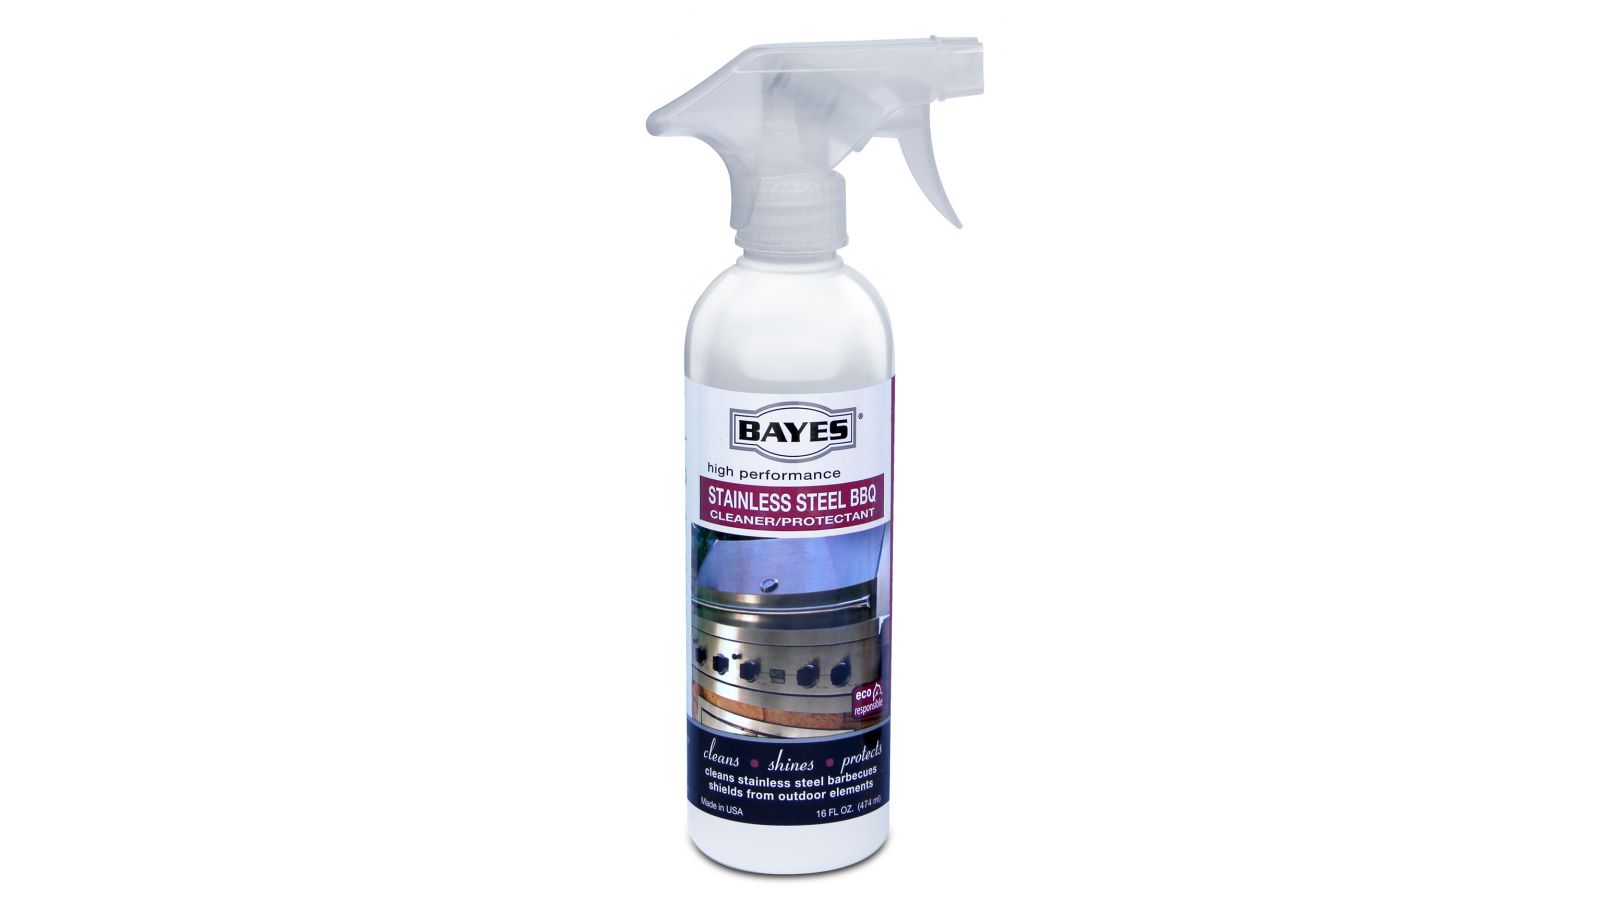 Bayes Stainless Steel BBQ Cleaner/Protectant